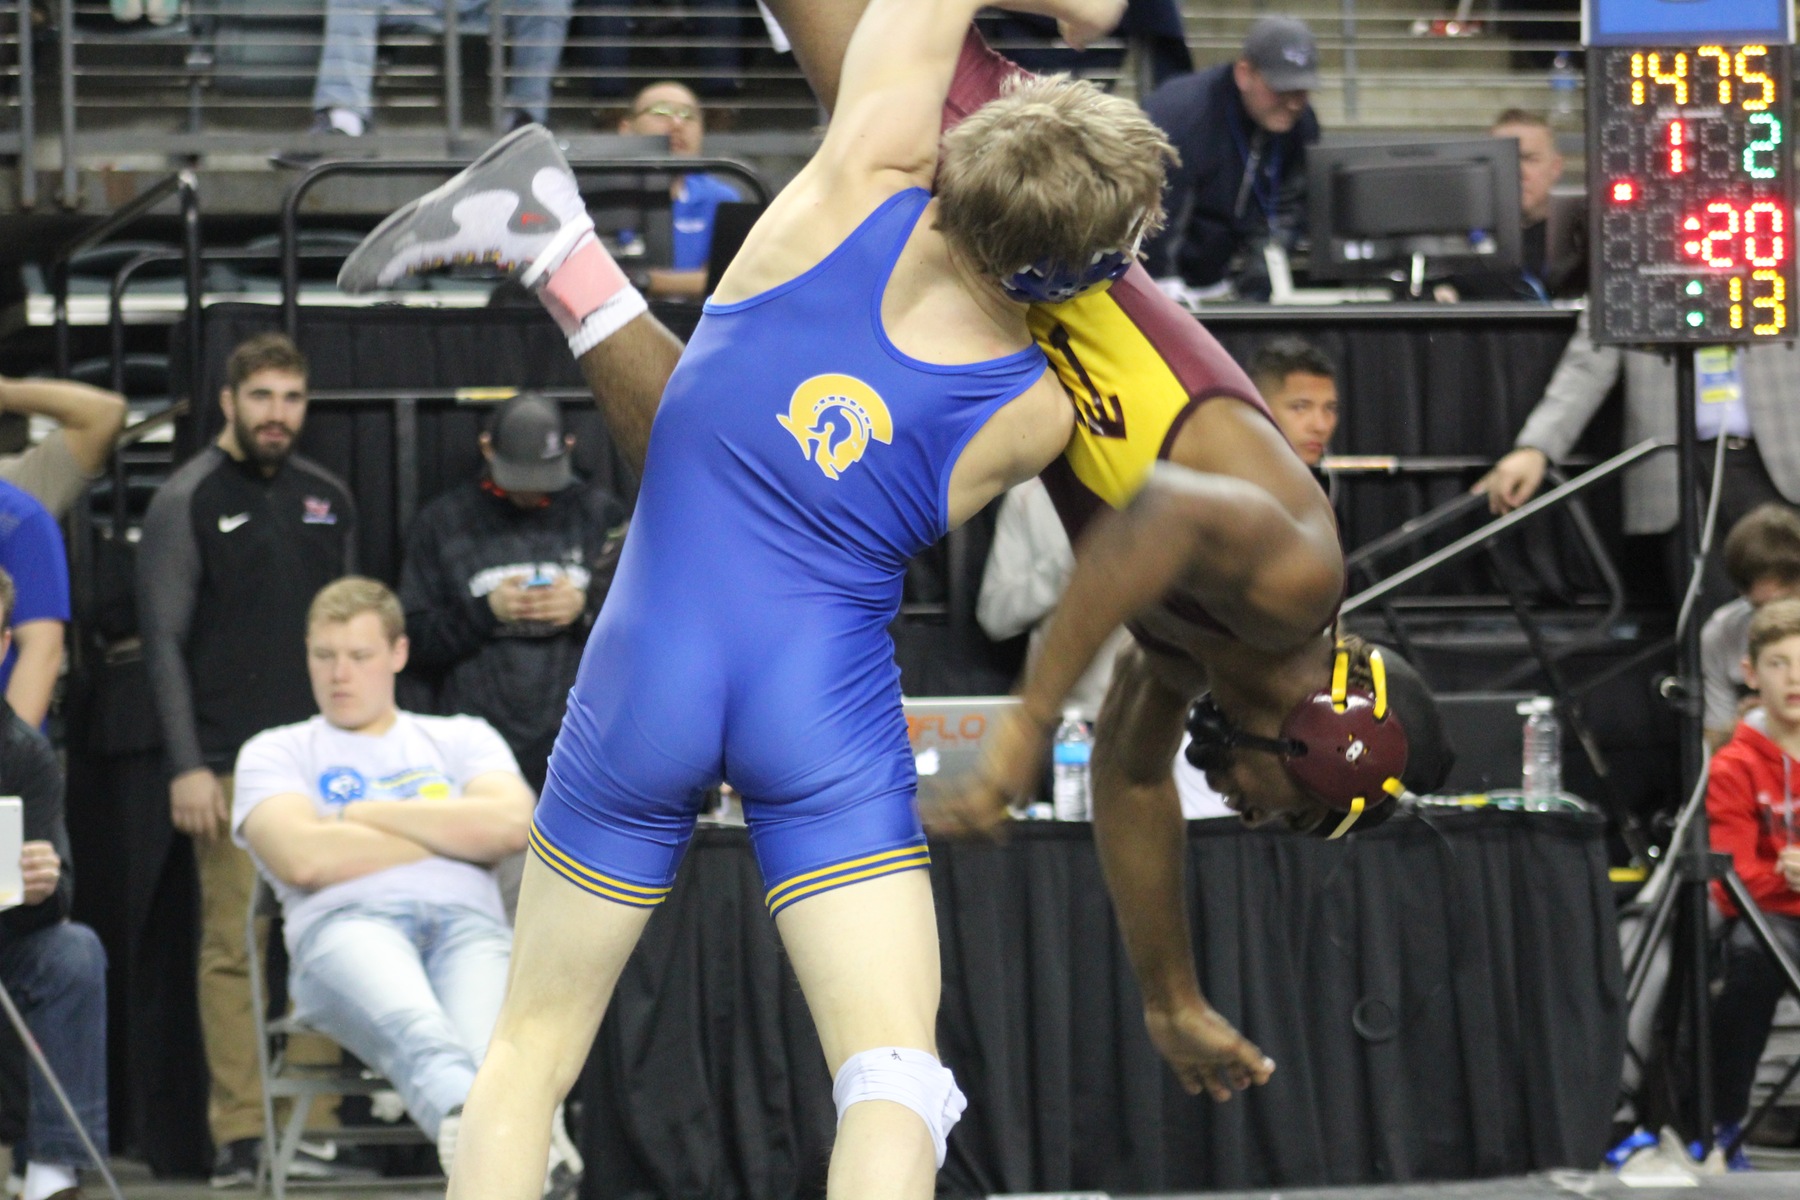 NIACC's Austin Anderly lifts Triton's Tyree Johnson in the air in their 141-pound semifinal match Saturday morning.